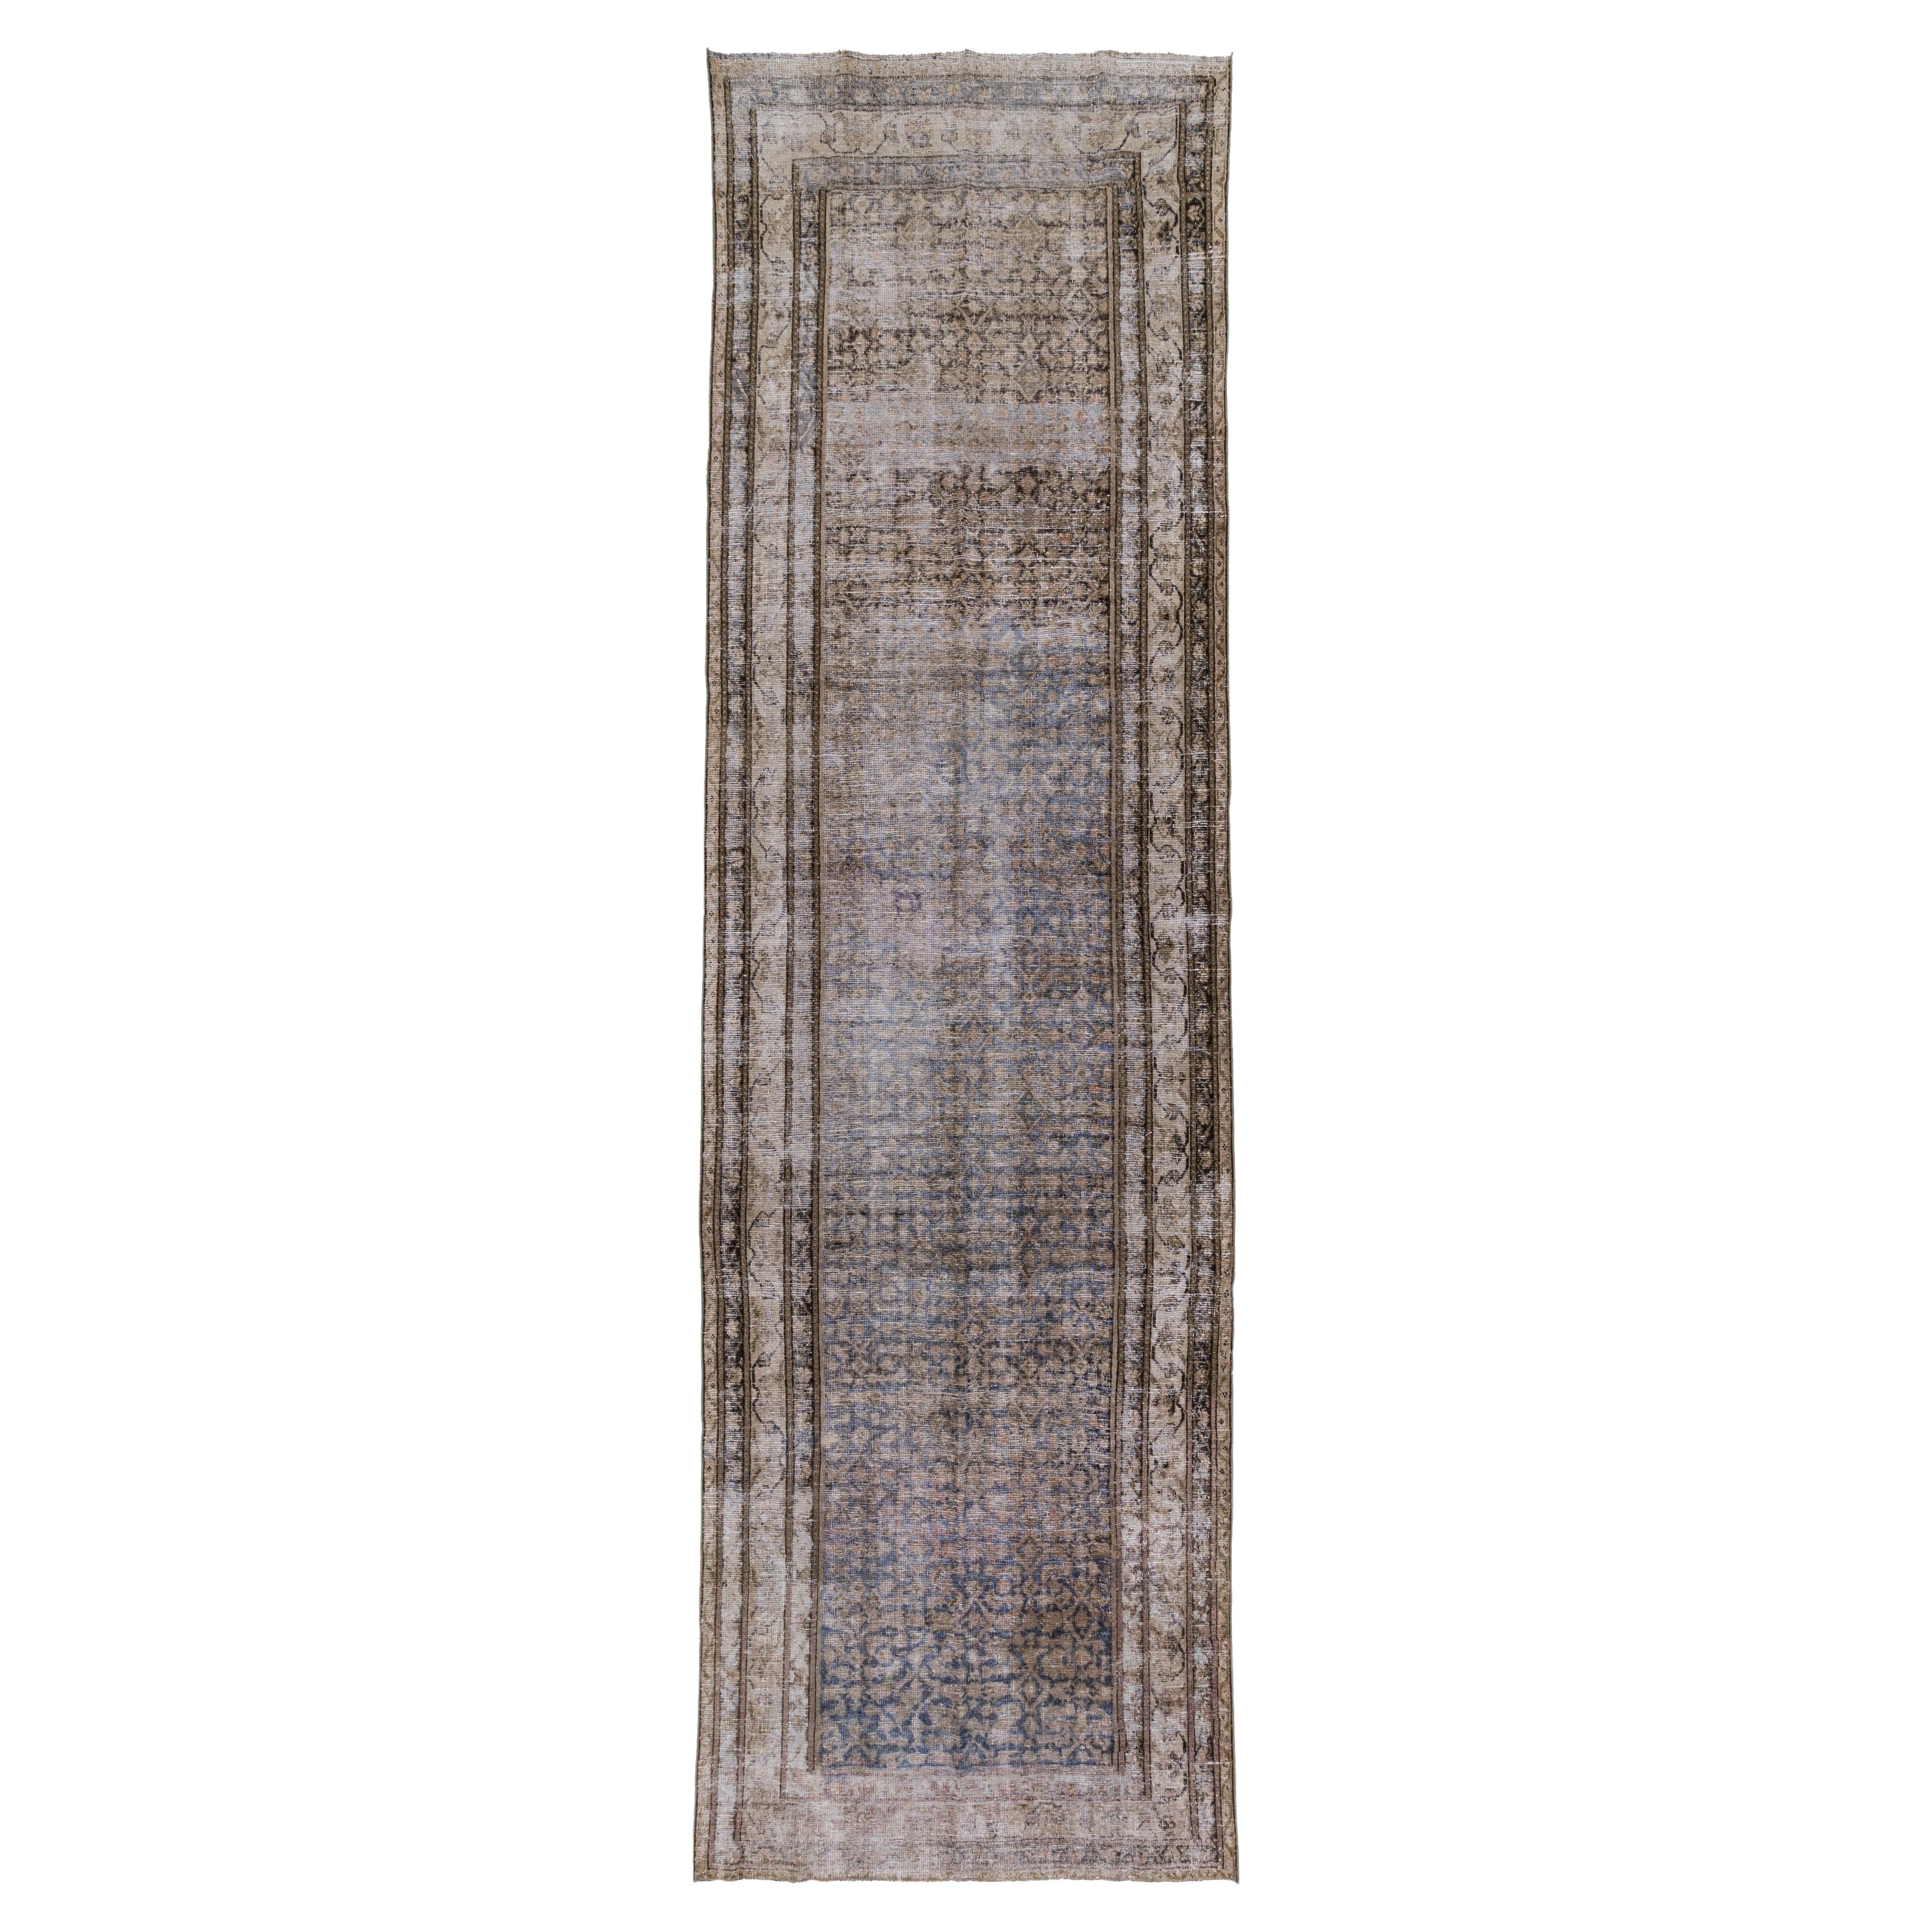 Lovely textural runner in a hard to find size. We love the subtle neutral field and pops of blue in the design. 

